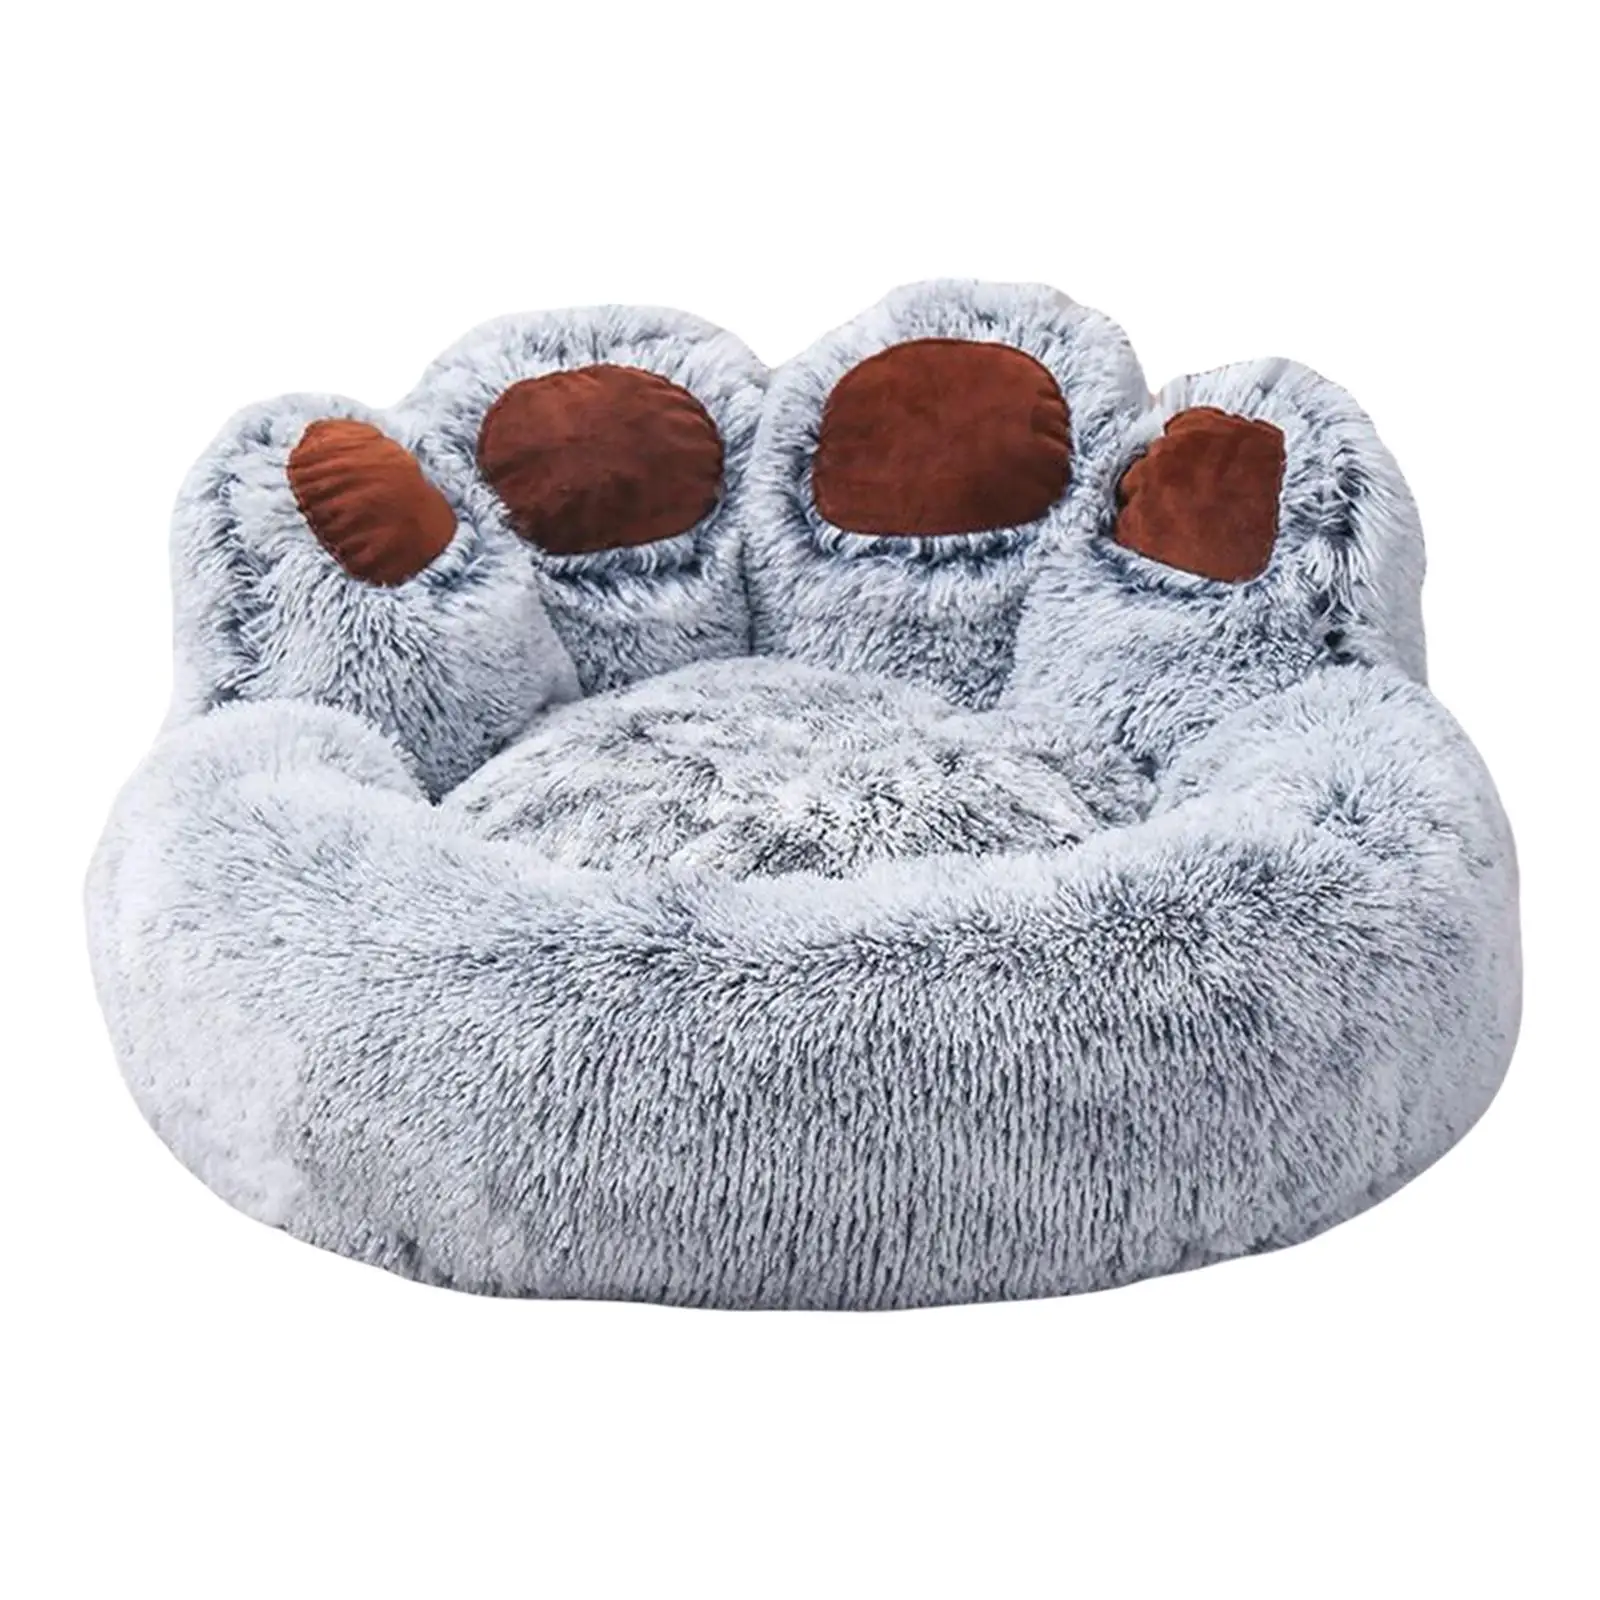 Plush Cat Warm House Dog Bed Hut Comfortable Nonslip Bottom Calming Pet Blanket for Doggy Puppy Indoor Playing Sleeping Cat